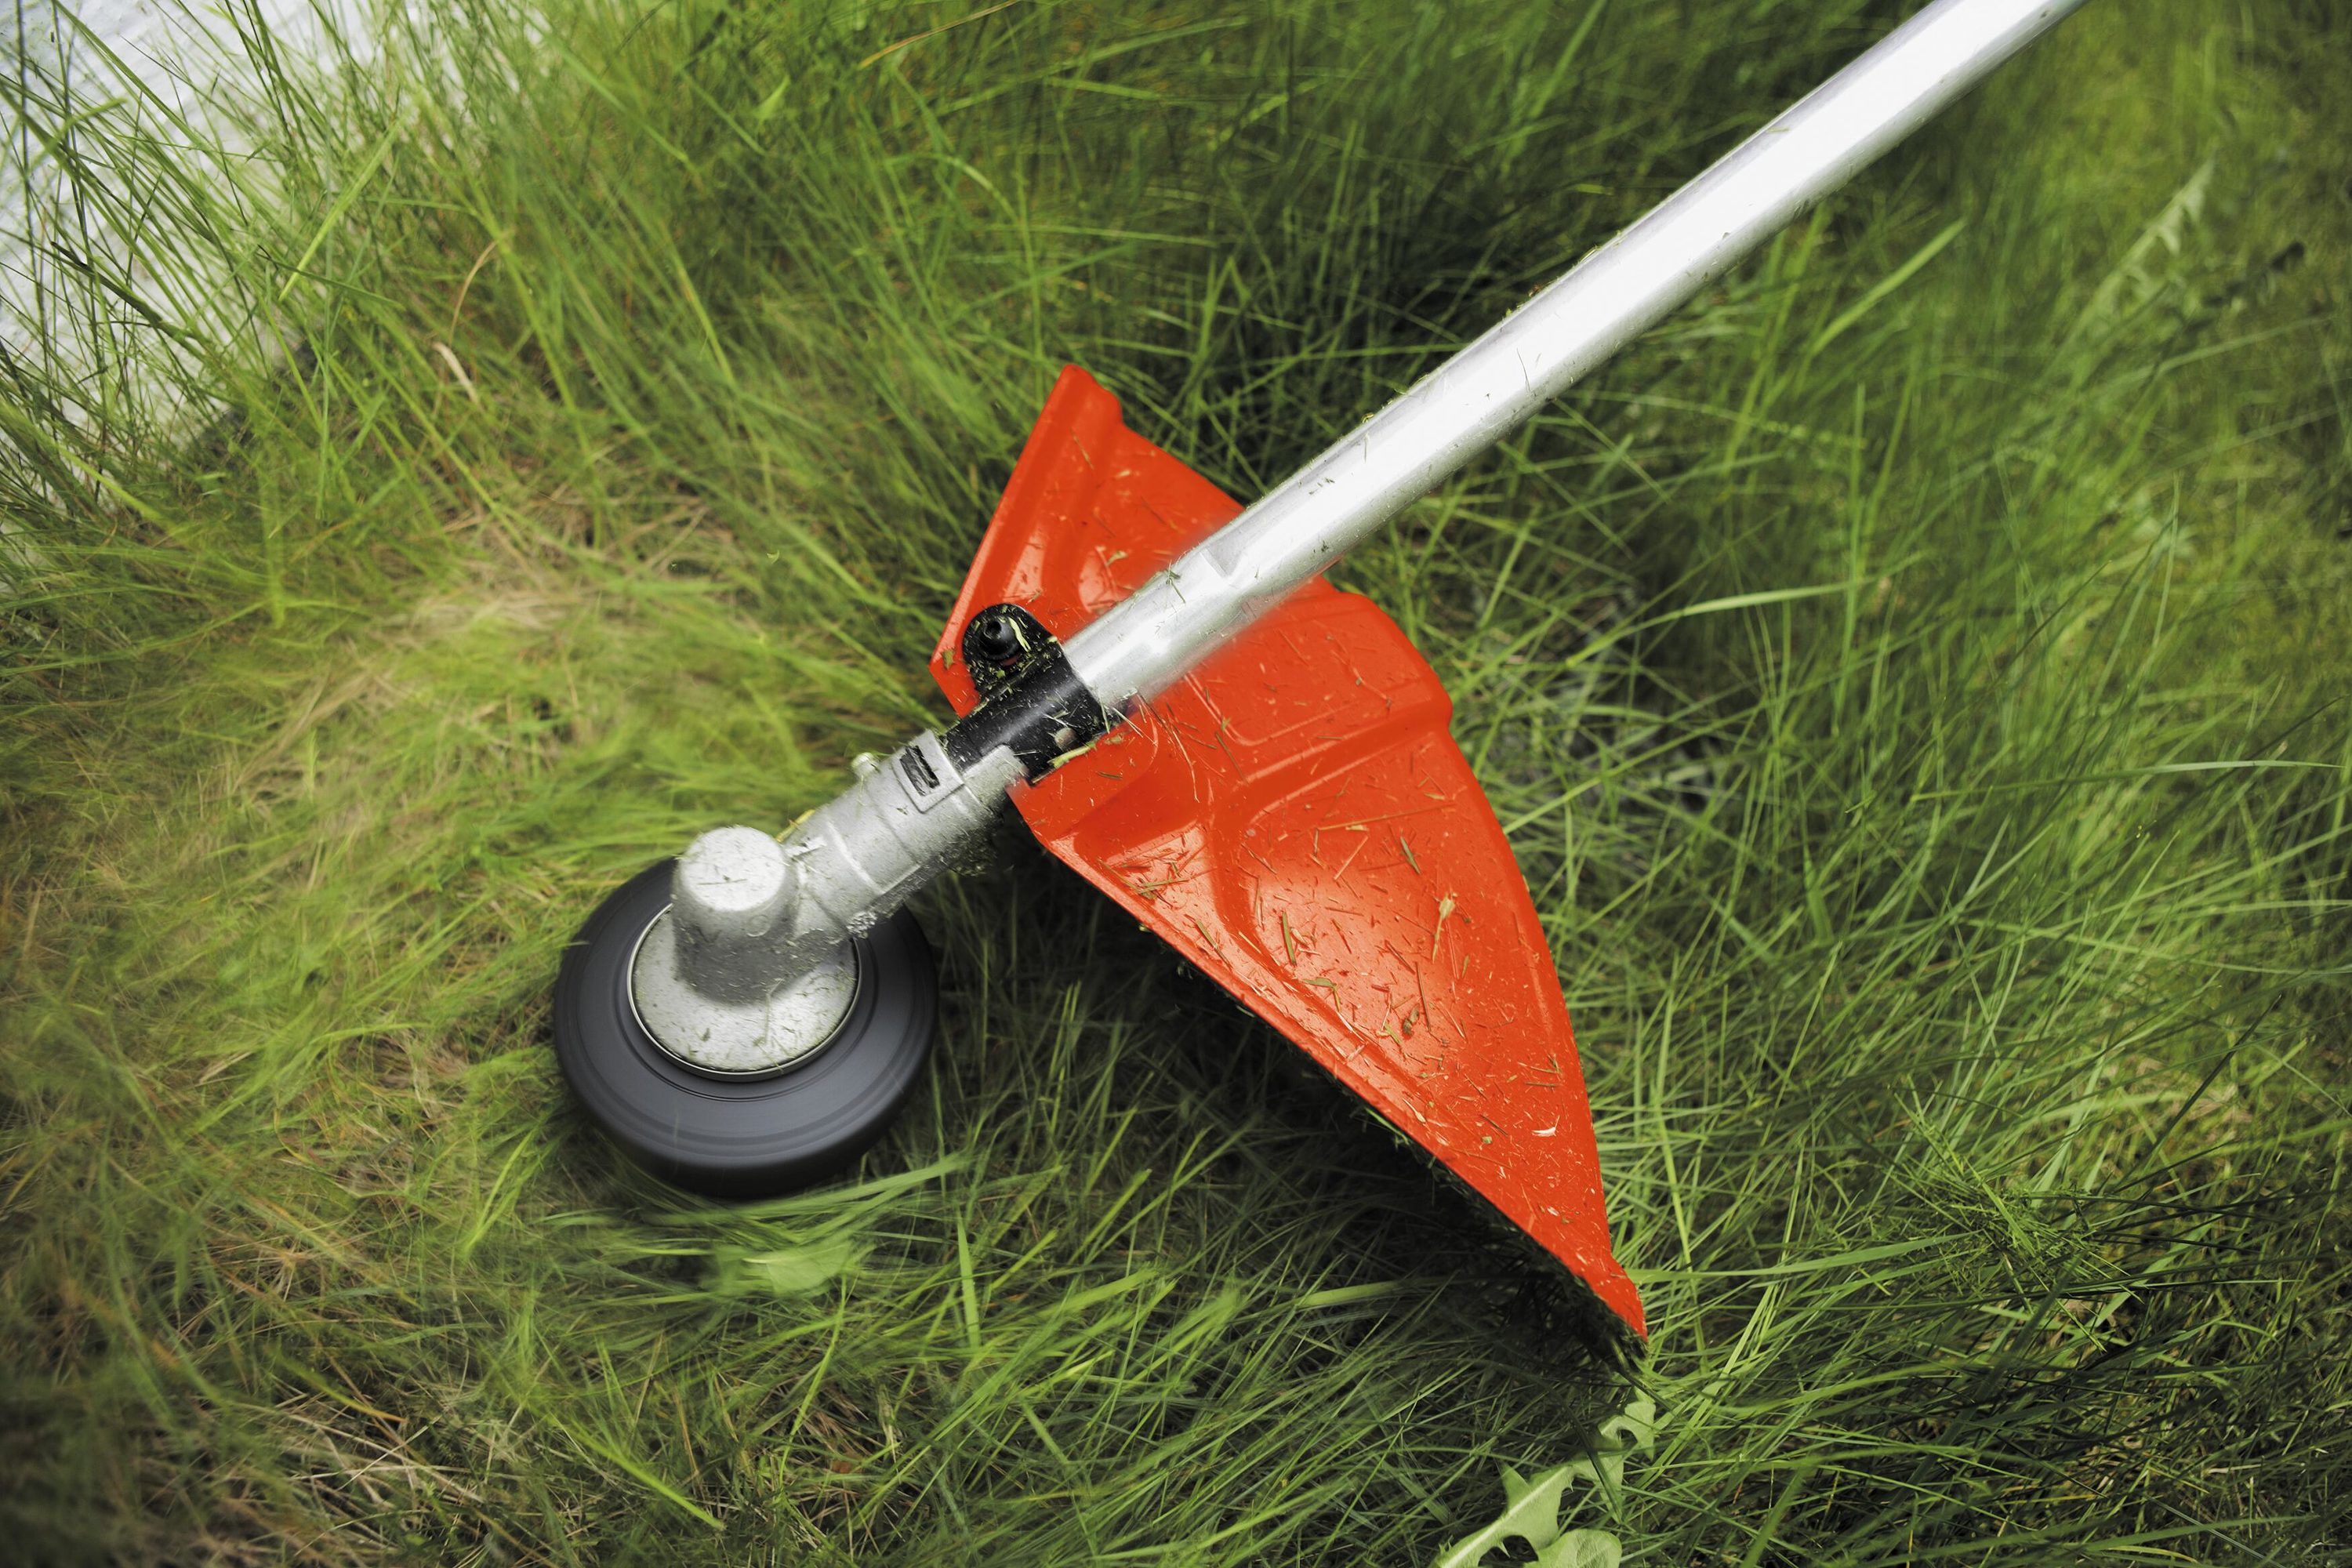 Husqvarna 128ld 28 Cc 2 Cycle 17 In Straight Shaft Gas String Trimmer